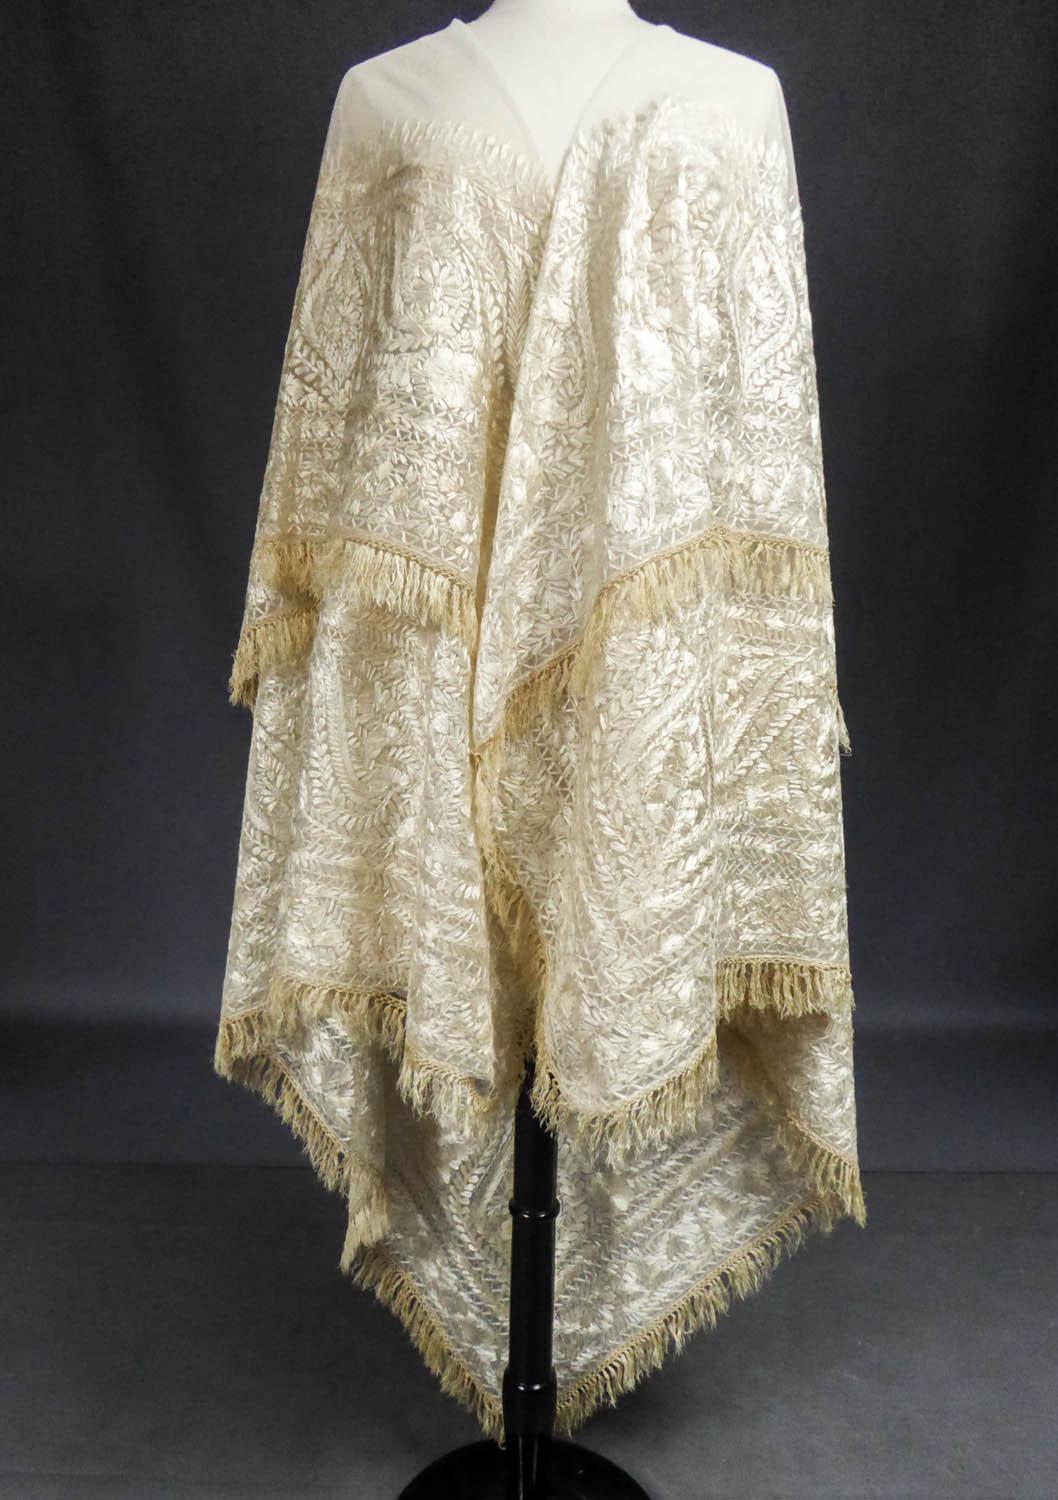 Turn-over shawl in Silk embroidered on Cotton Net - Circa 1840 6